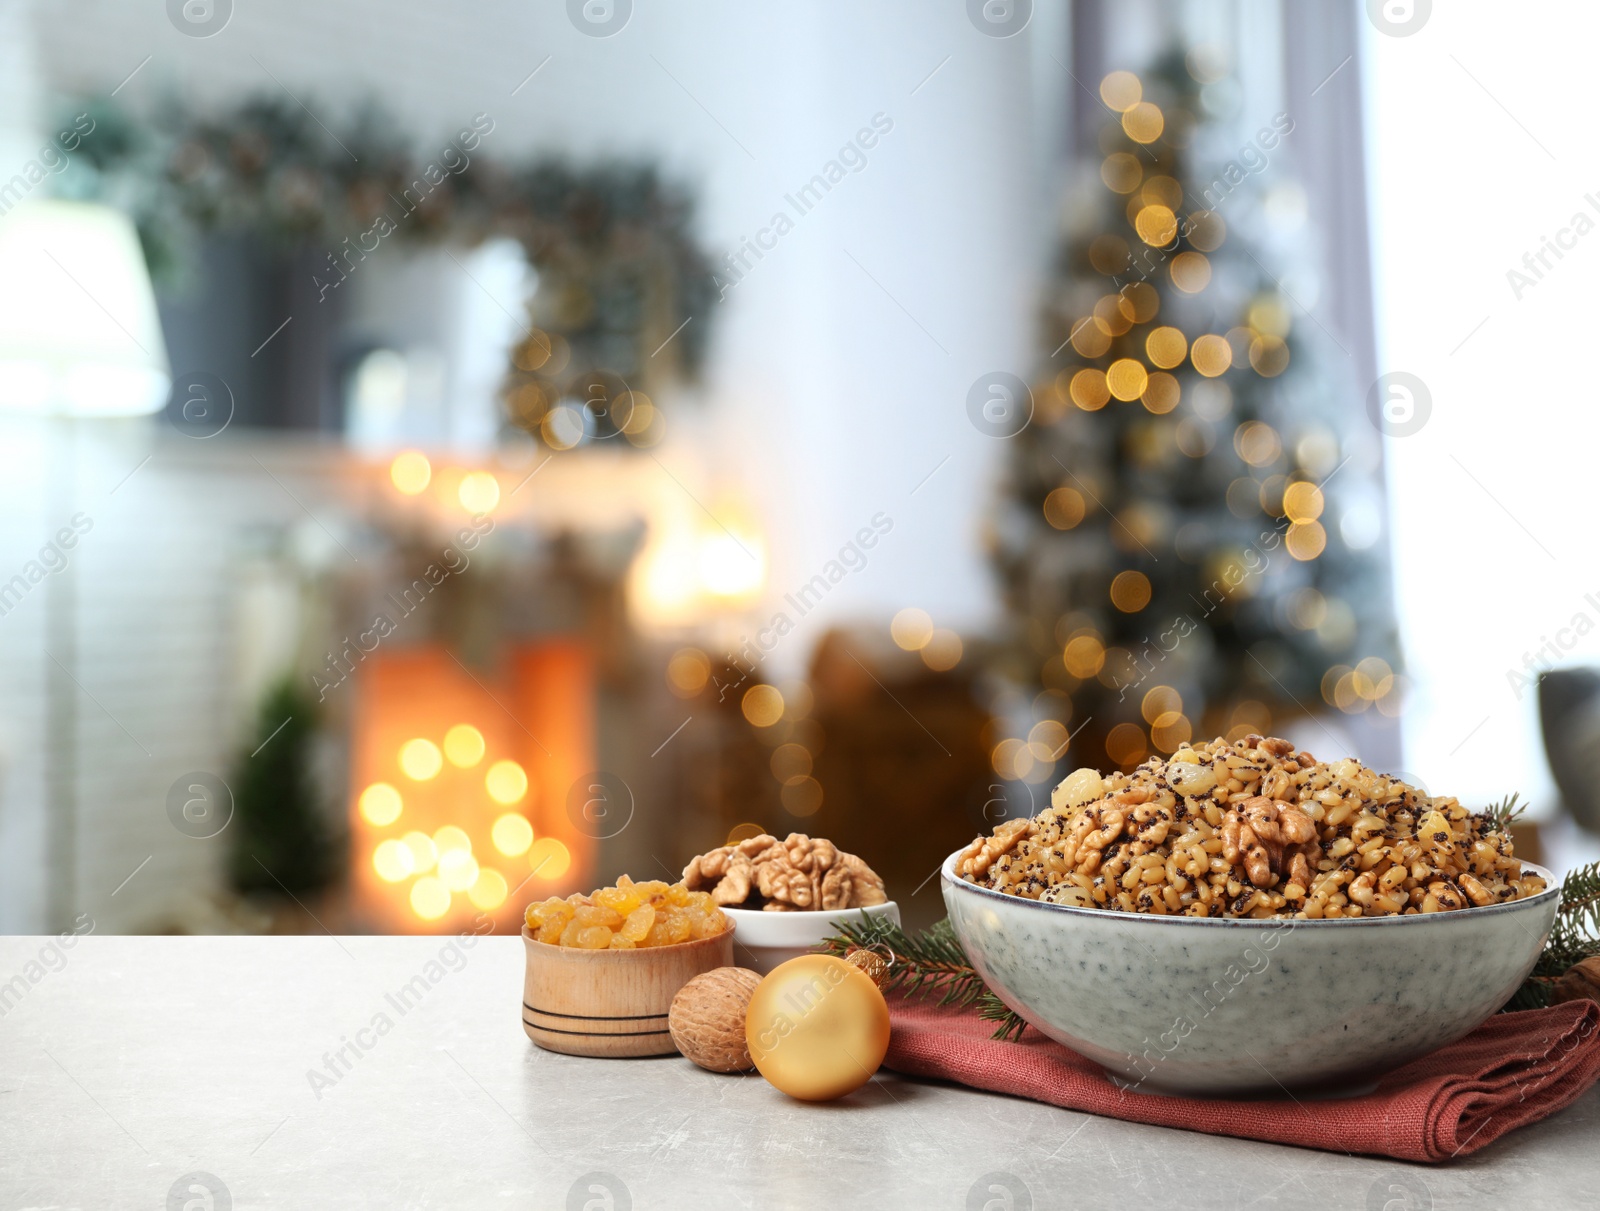 Image of Traditional Christmas slavic dish kutia on table in decorated room. Space for text